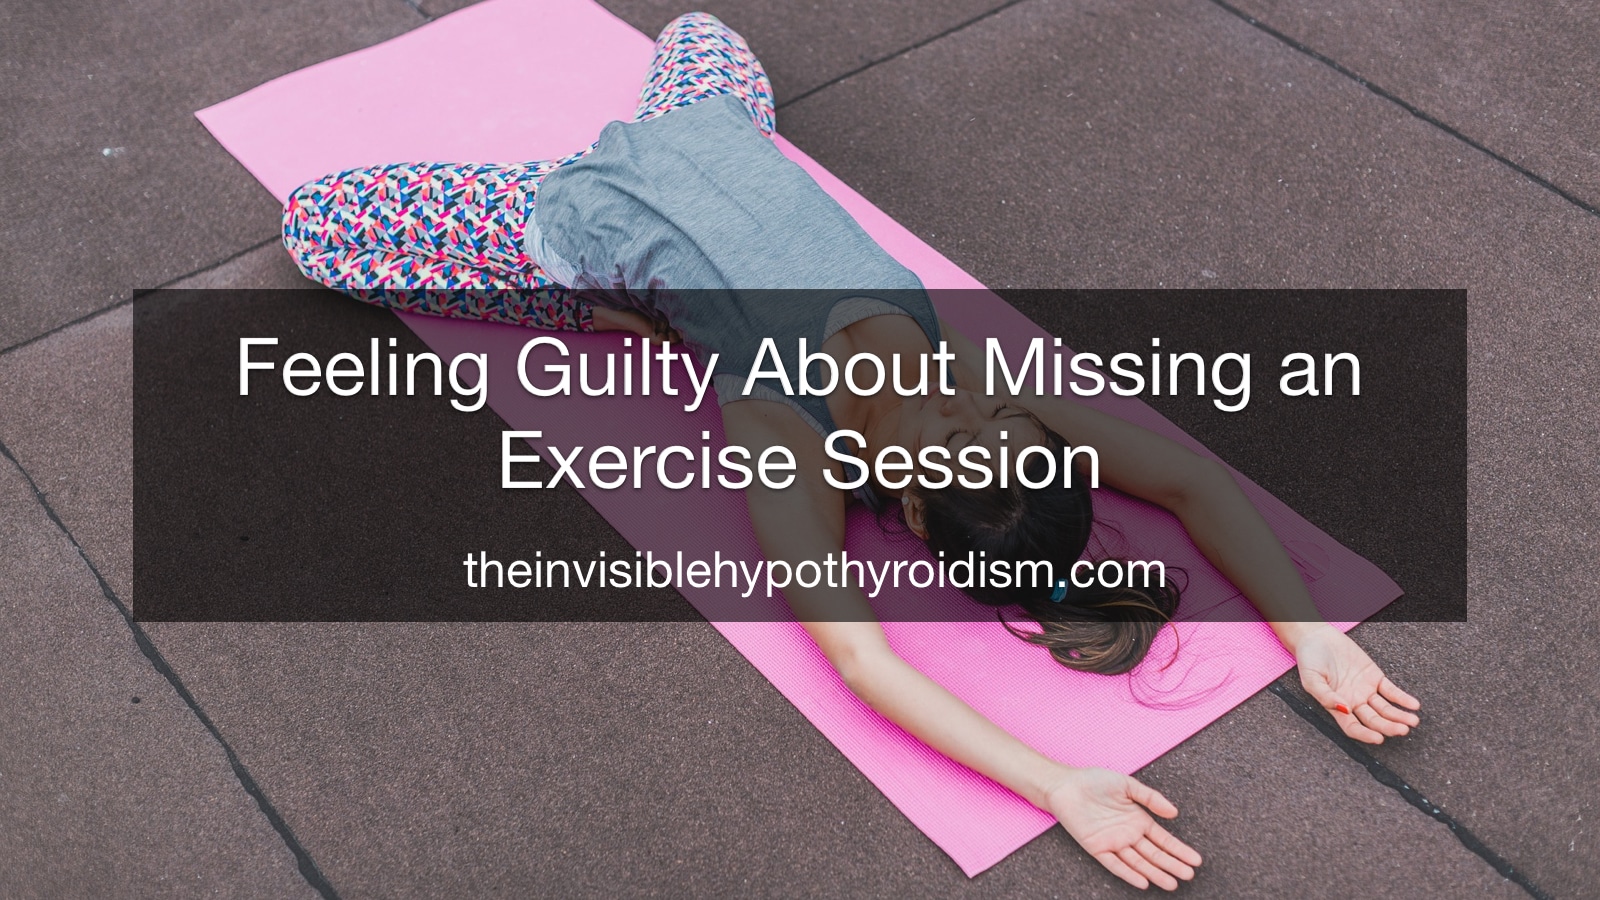 Feeling Guilty About Missing an Exercise Session